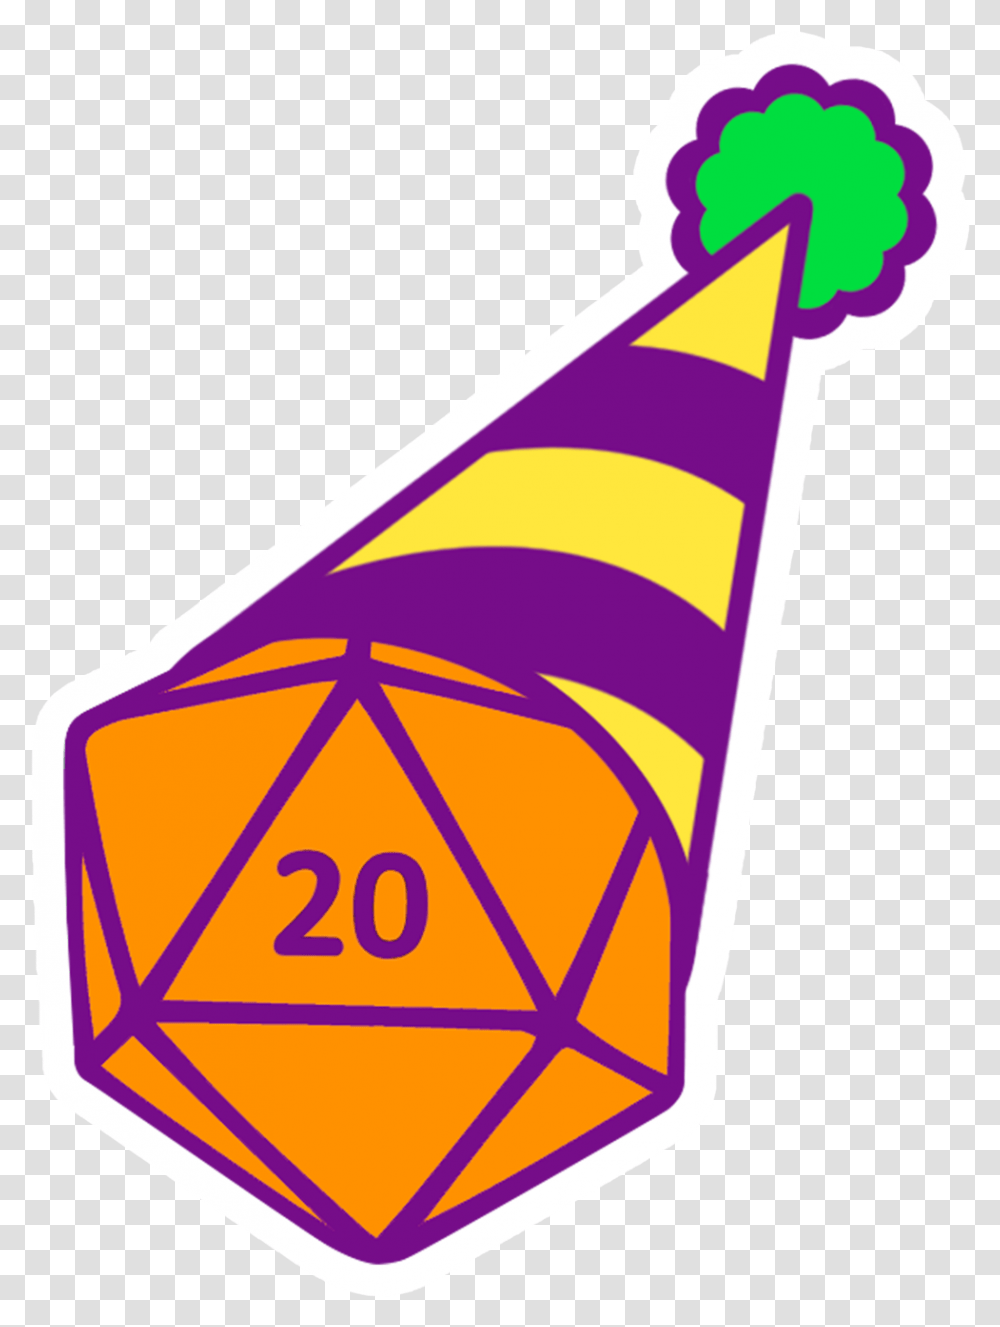 Encounter Party Top Rated D&d Adventure Podcast, Clothing, Apparel, Party Hat Transparent Png